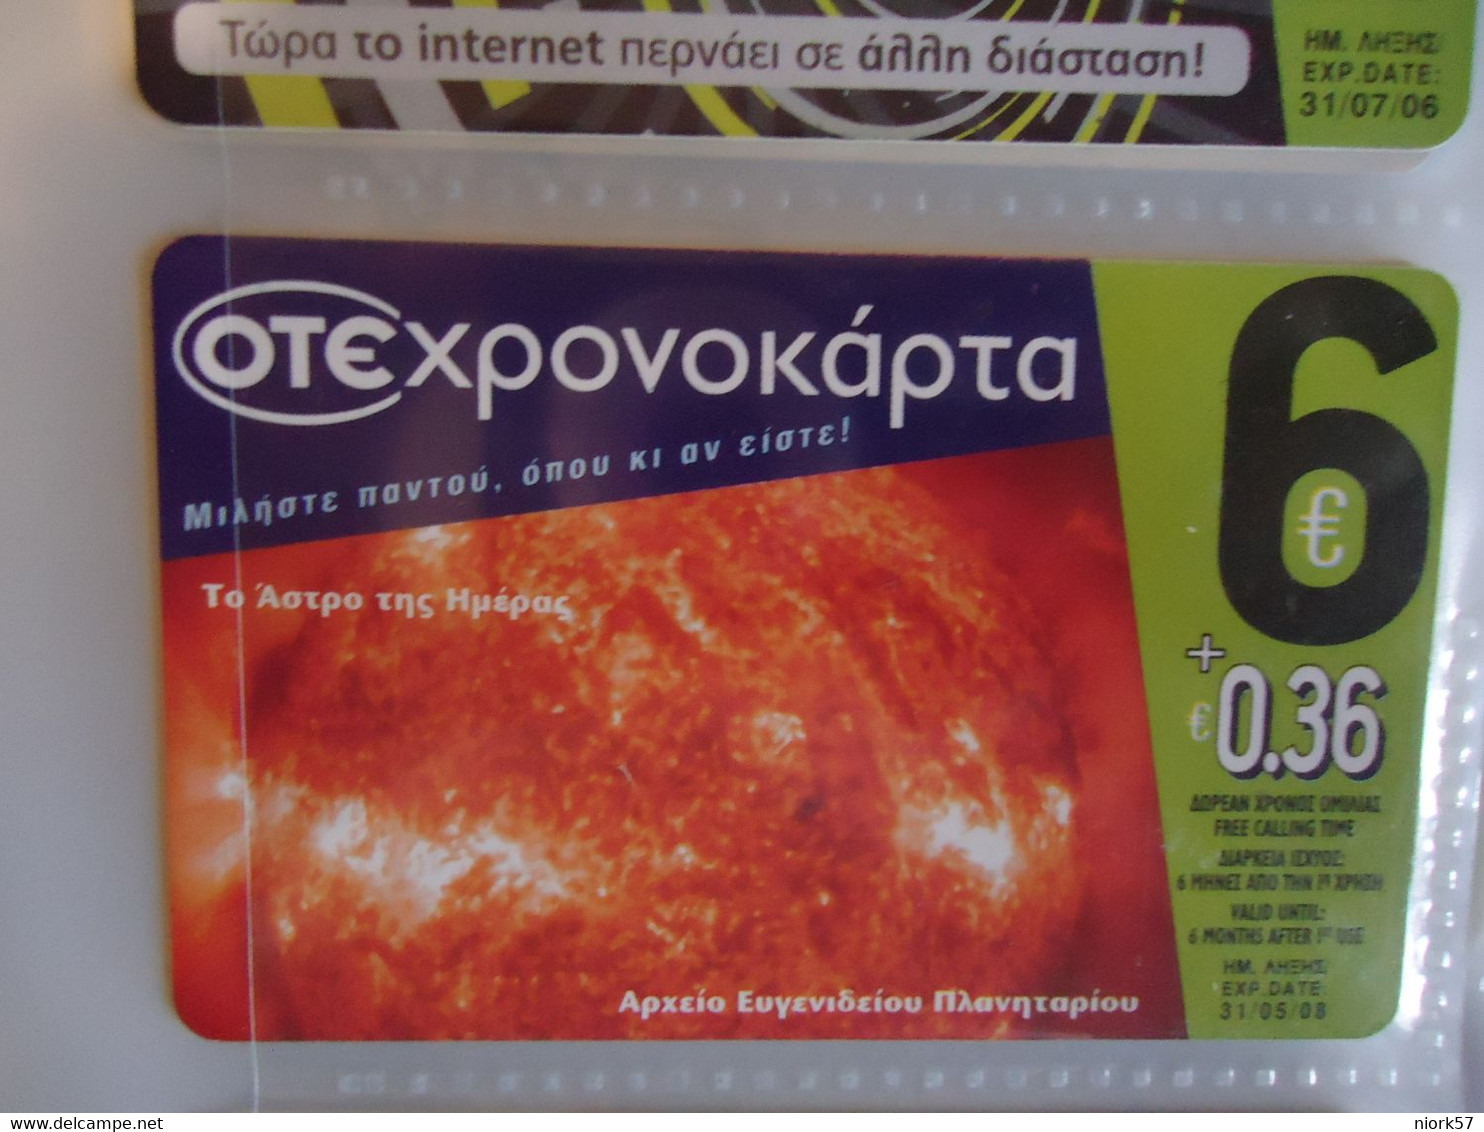 GREECE USED PREPAID CARDS  SPACE PLANET - Space